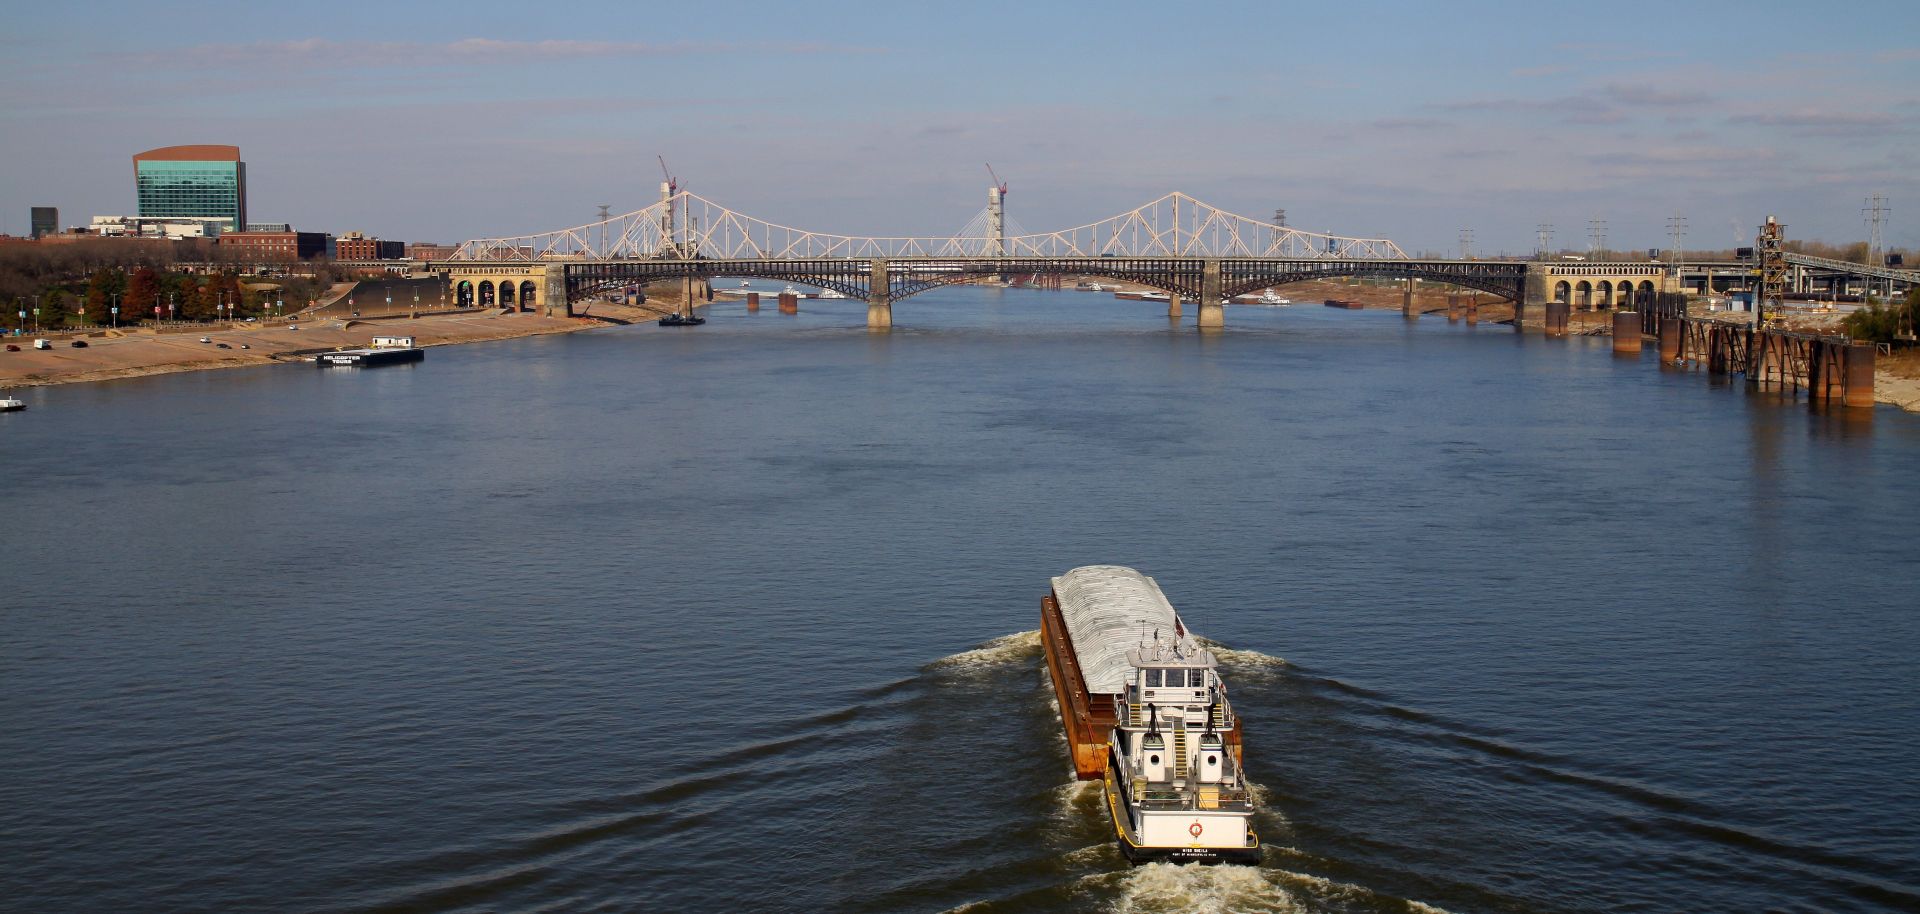 A tugboat pushes a barge up the Mississippi River, as photographed from I-55 in St. Louis, Missouri on NOVEMBER 04, 2012.